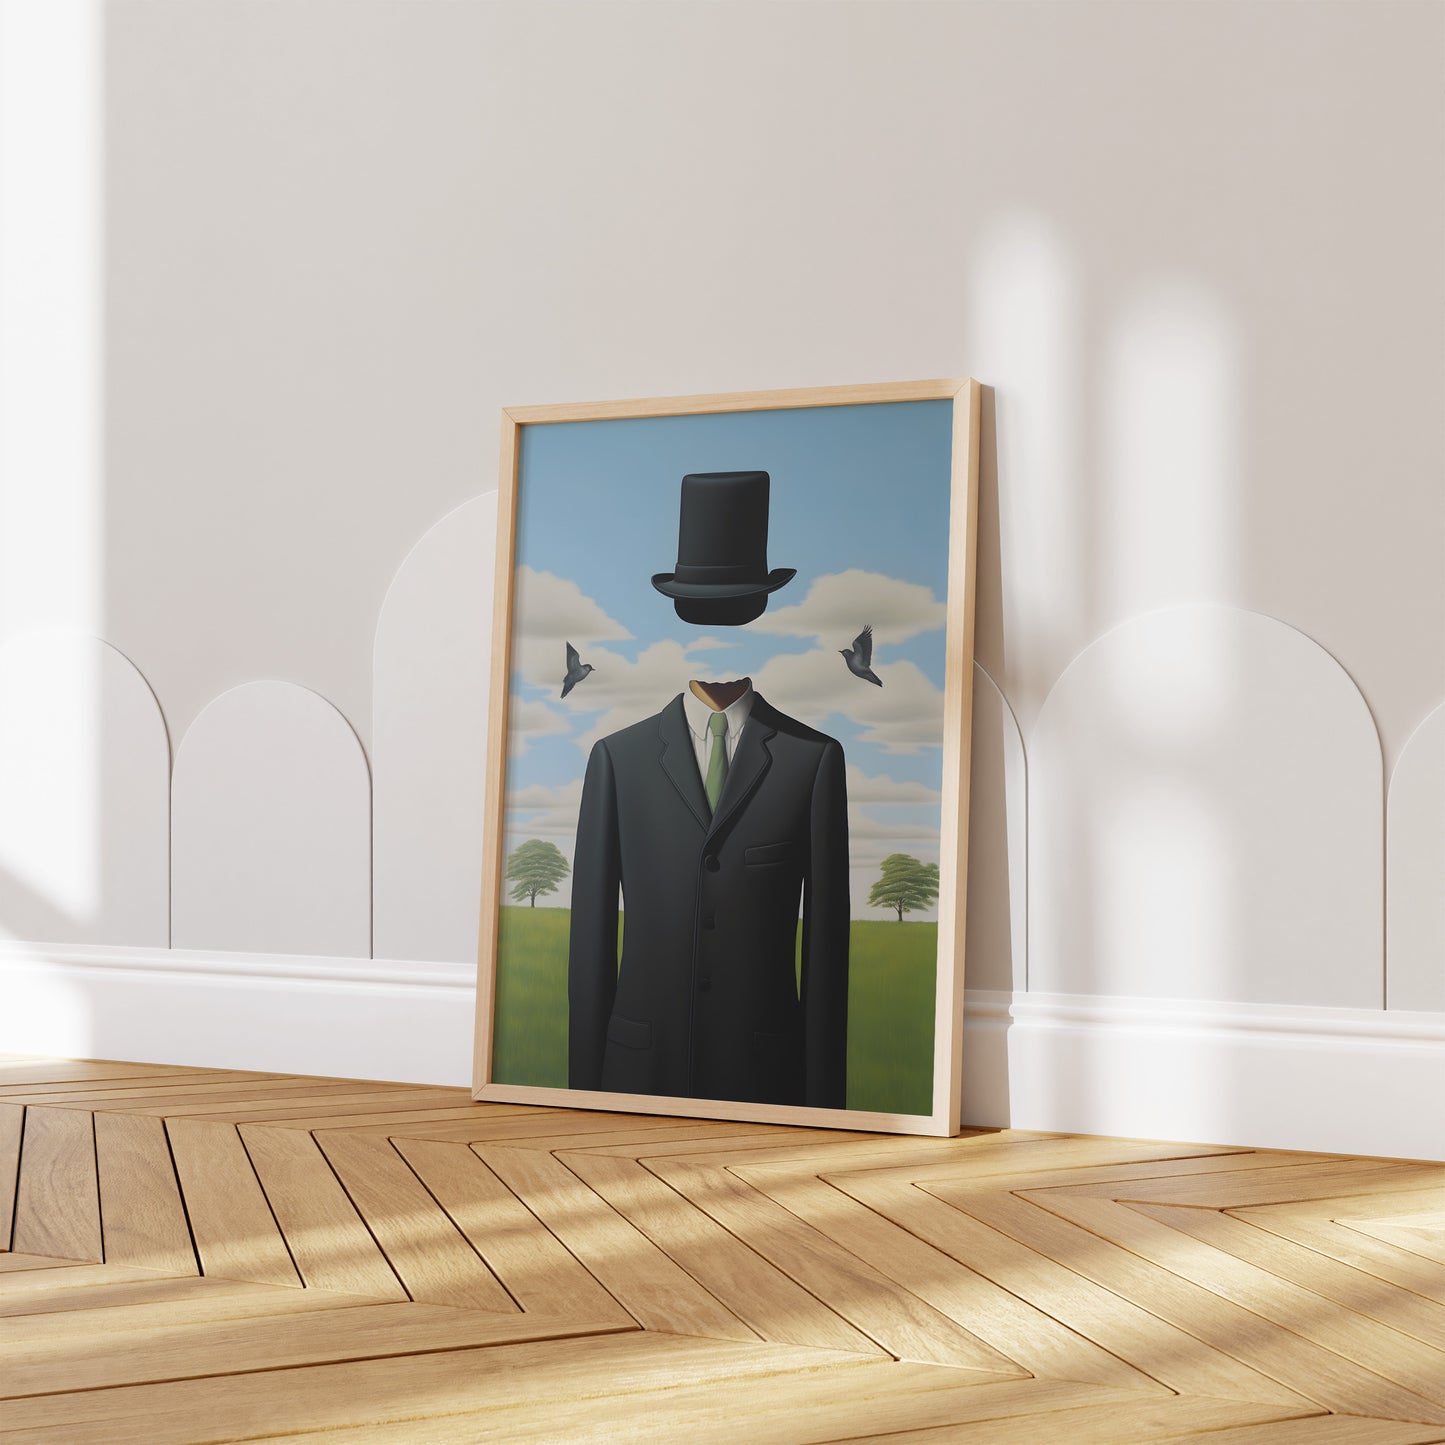 A framed painting of a man with an apple head and bowler hat on a gallery wall.